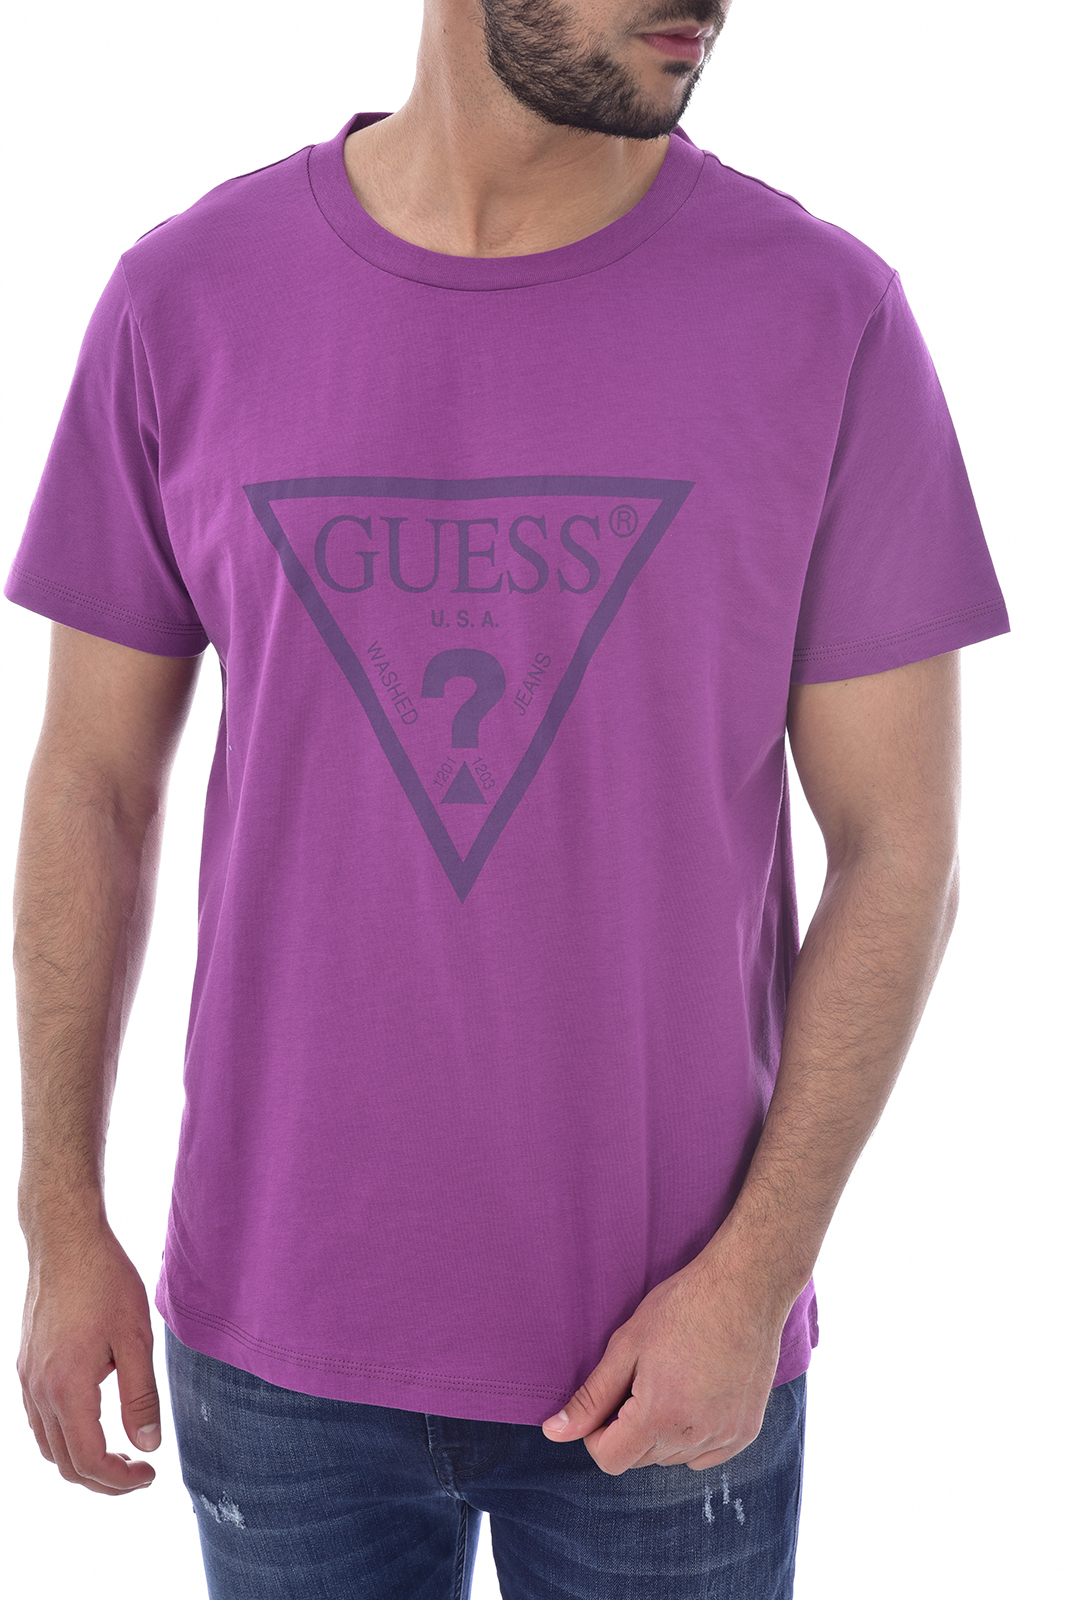 Tee-shirt violet manches courtes homme - Guess F92i00